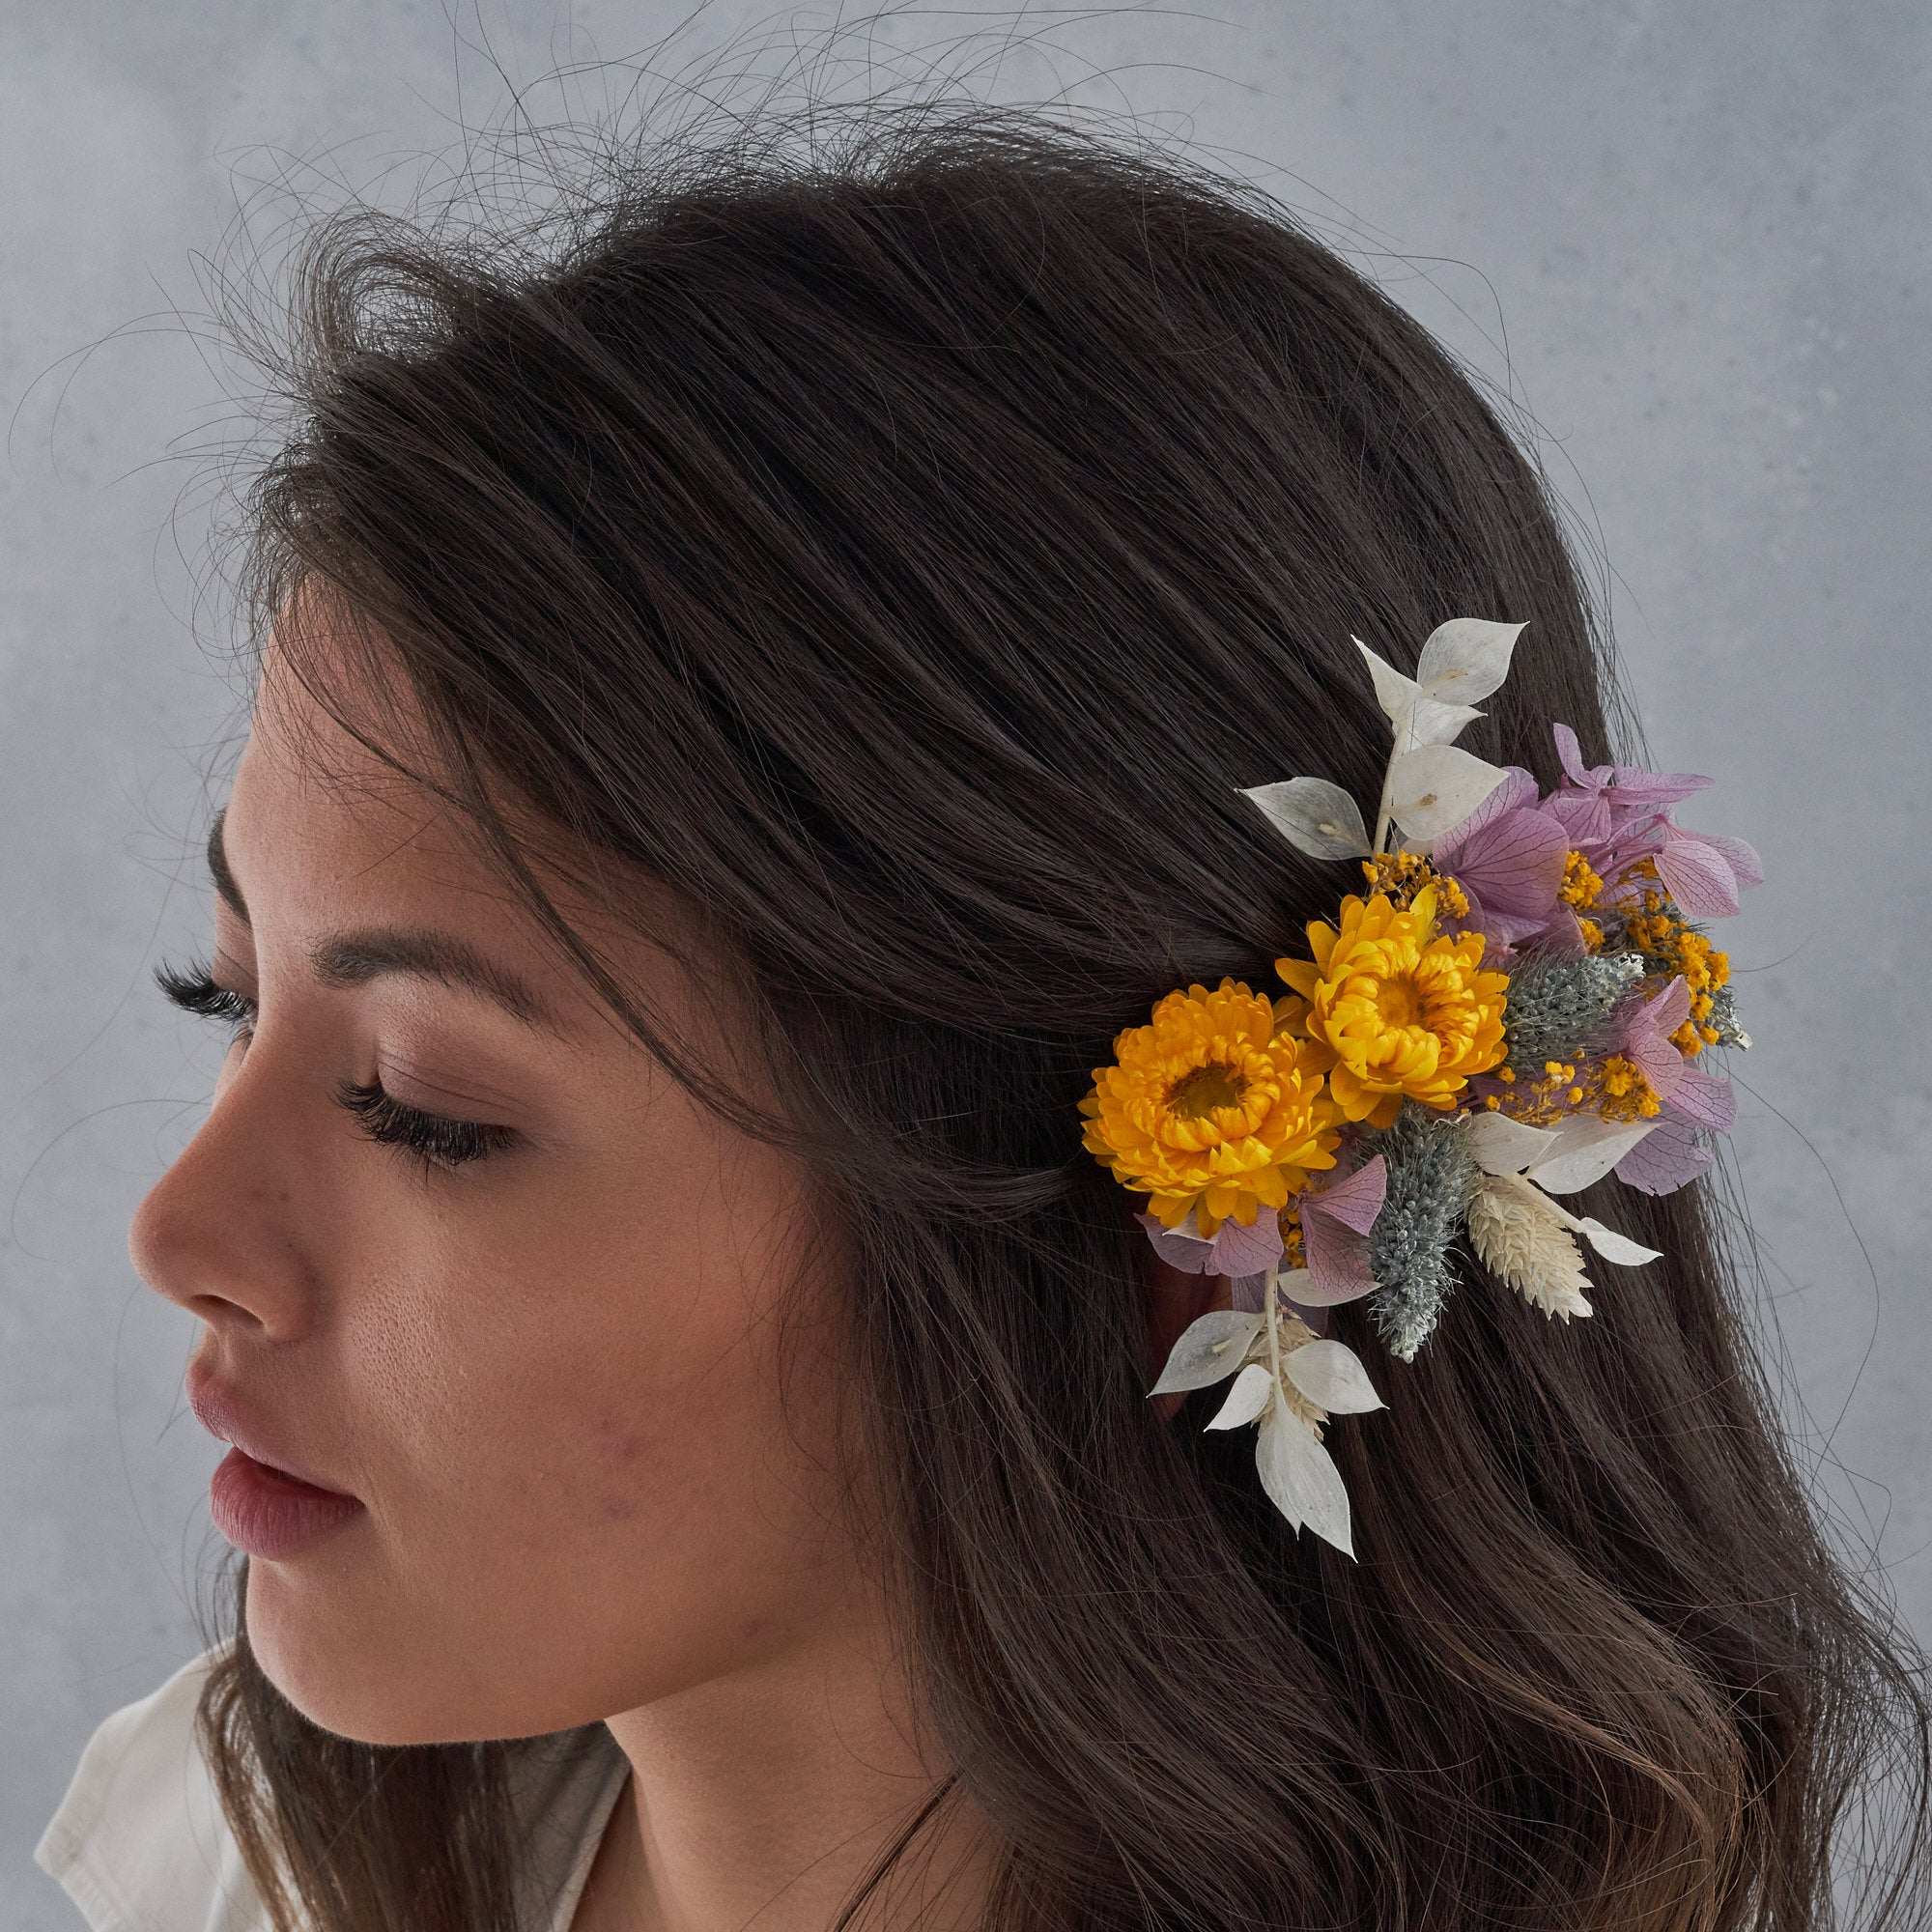 Dried flower hair comb : dusty lilac and sunshine yellow